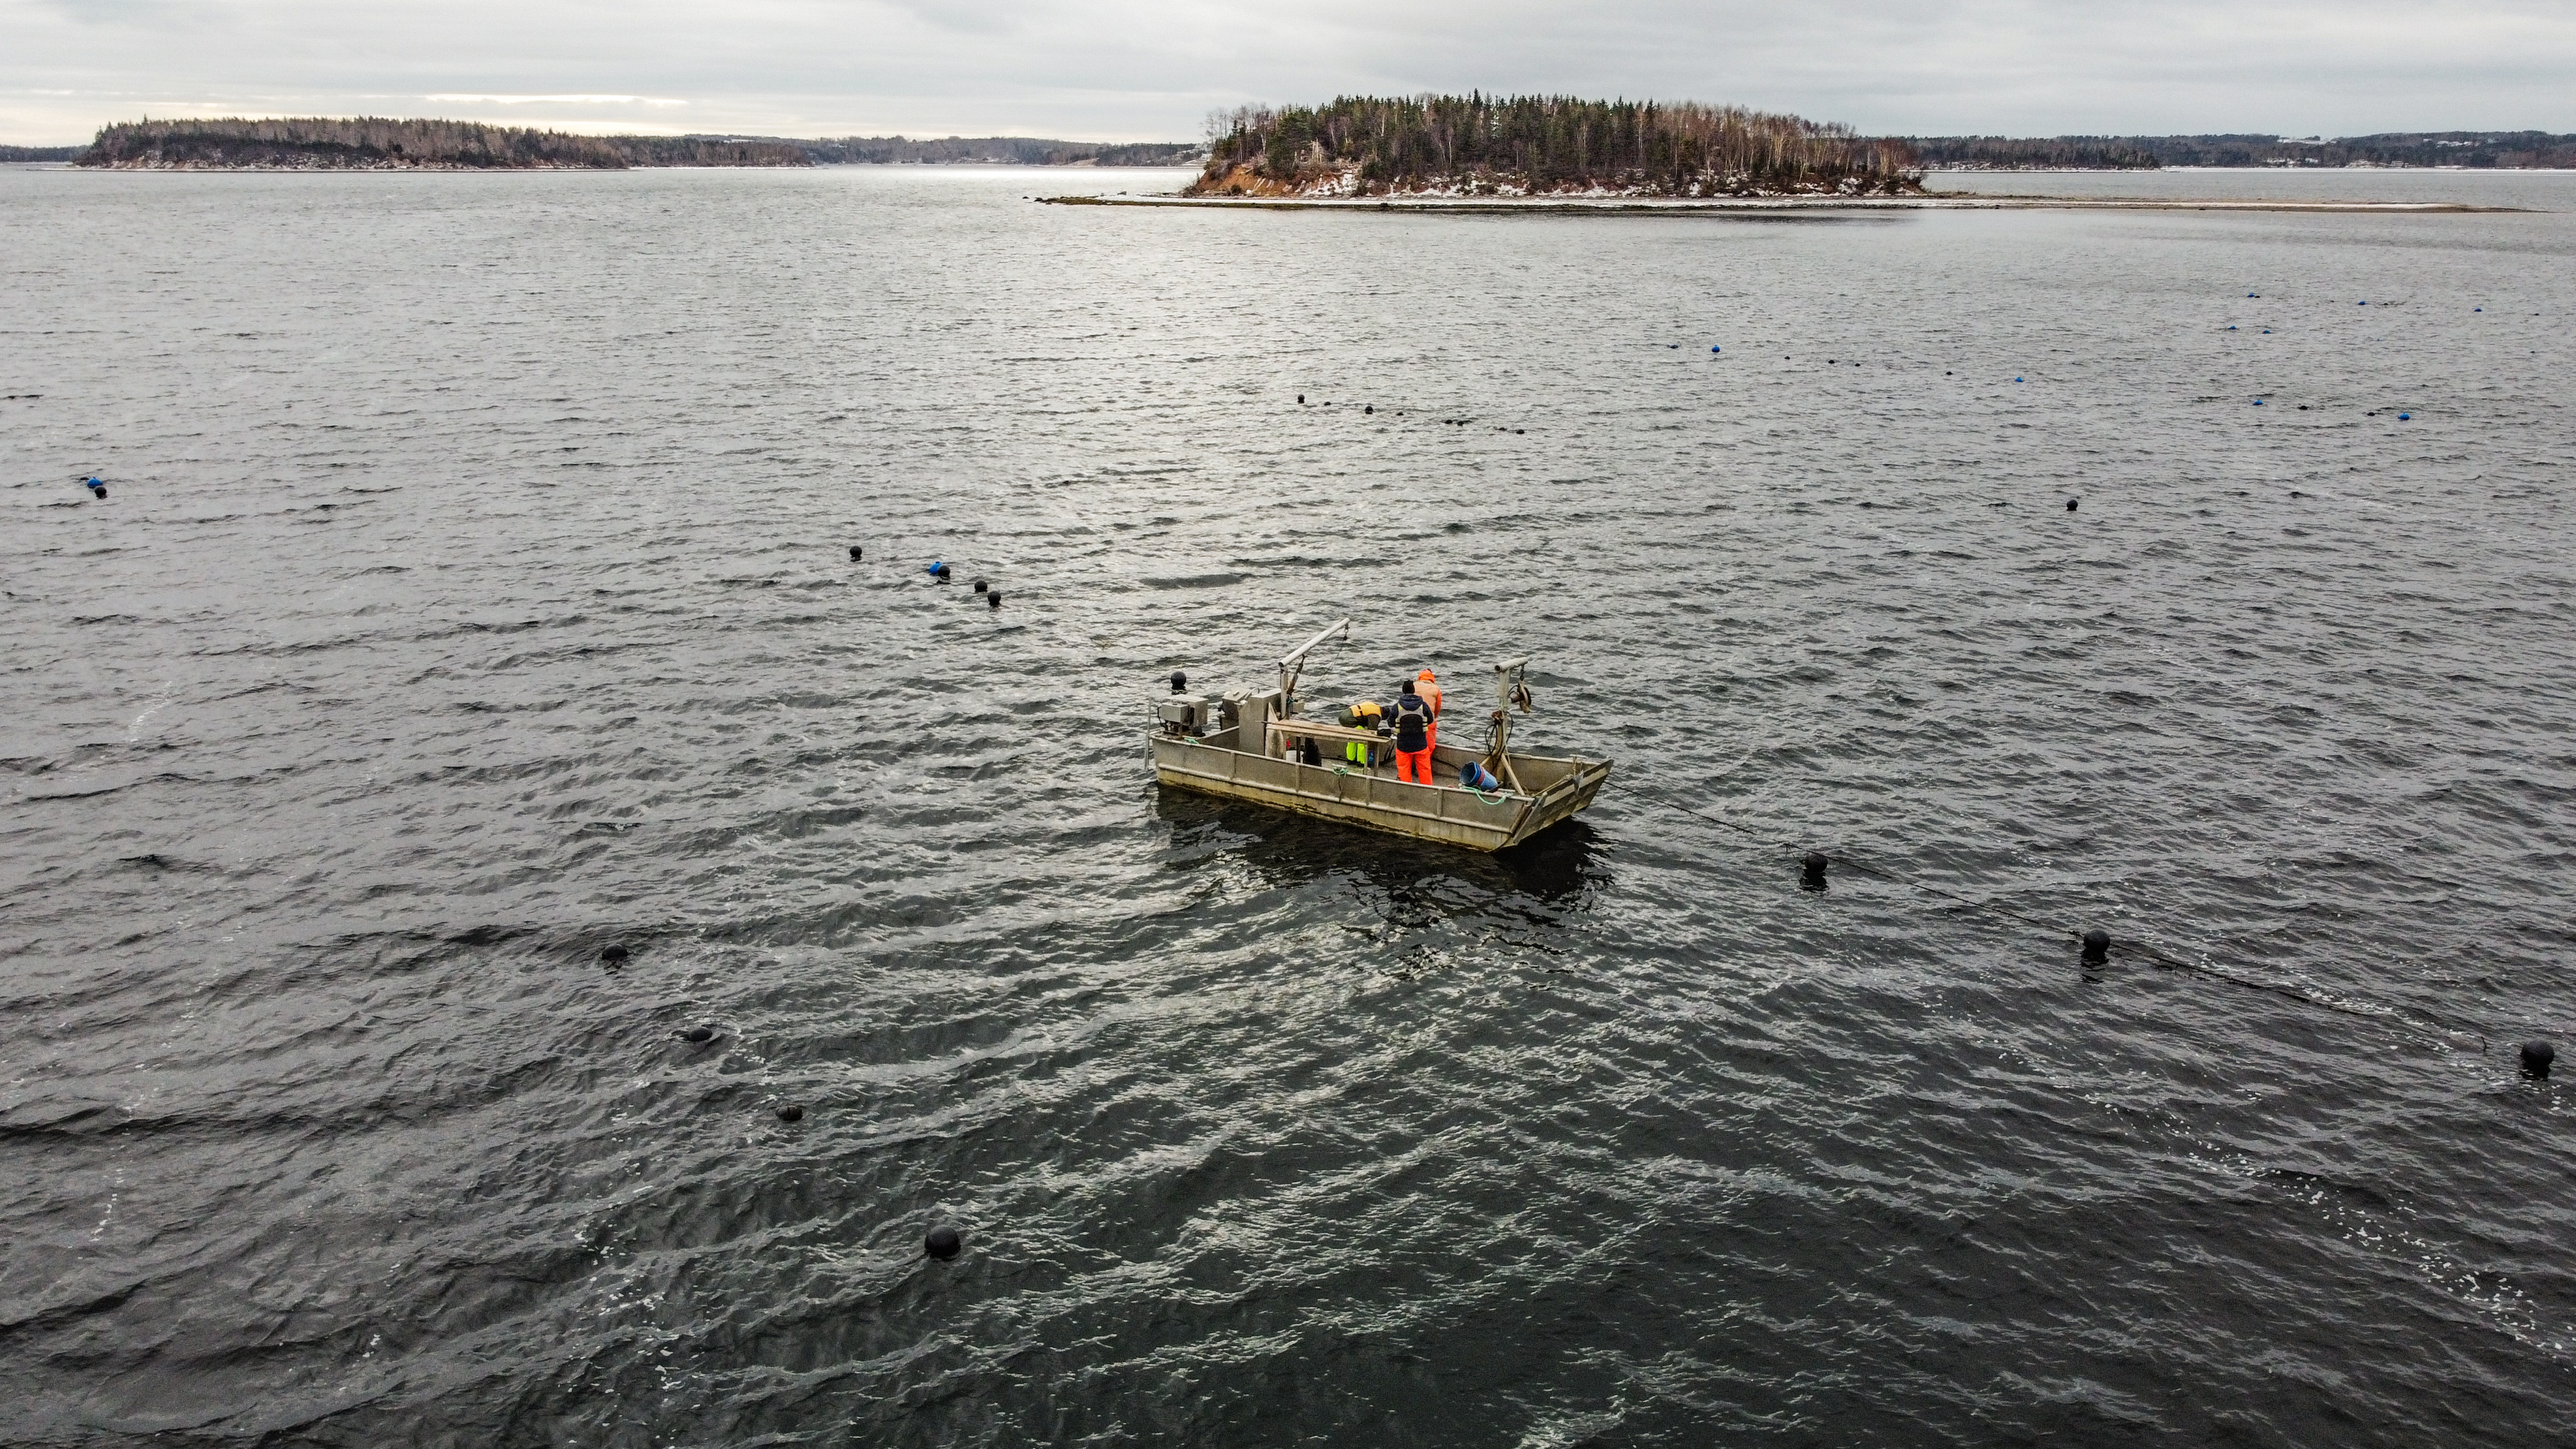 At a distance, 2 persons are working in a seaweed aquaculture vessel on the water.